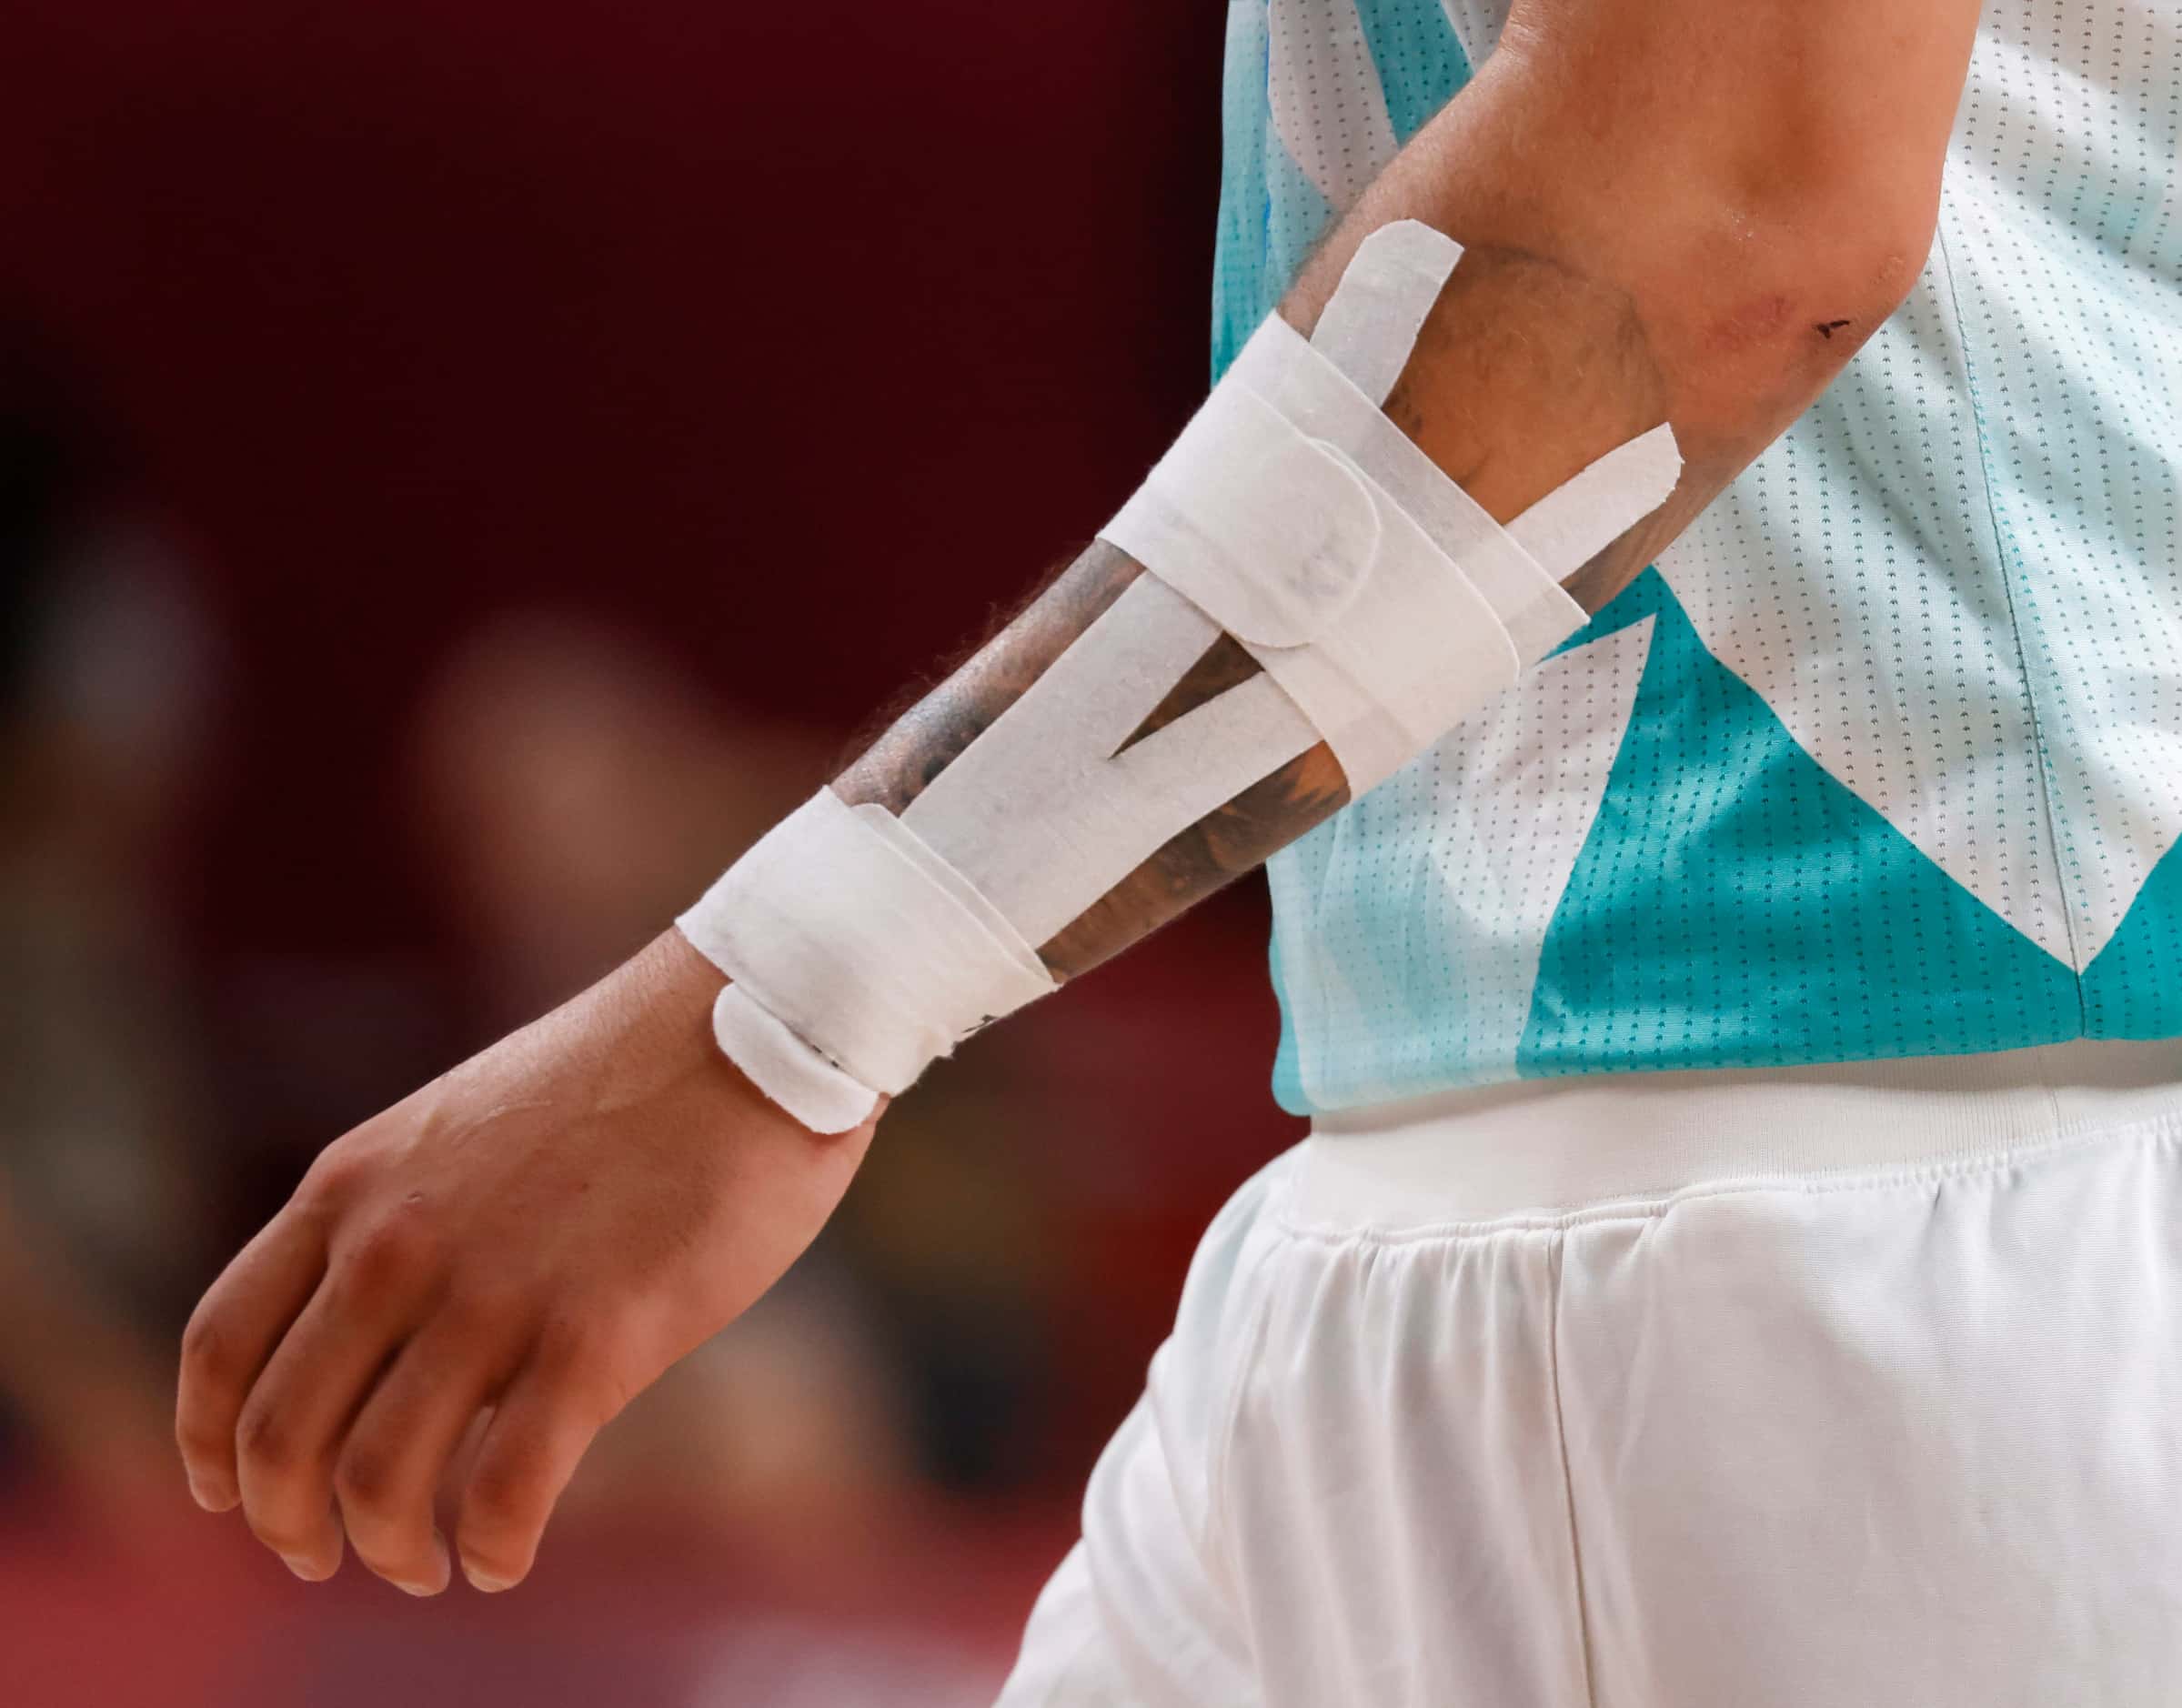 Slovenia’s Luka Doncic (77) plays with a taped forearm against Australia in the bronze medal...